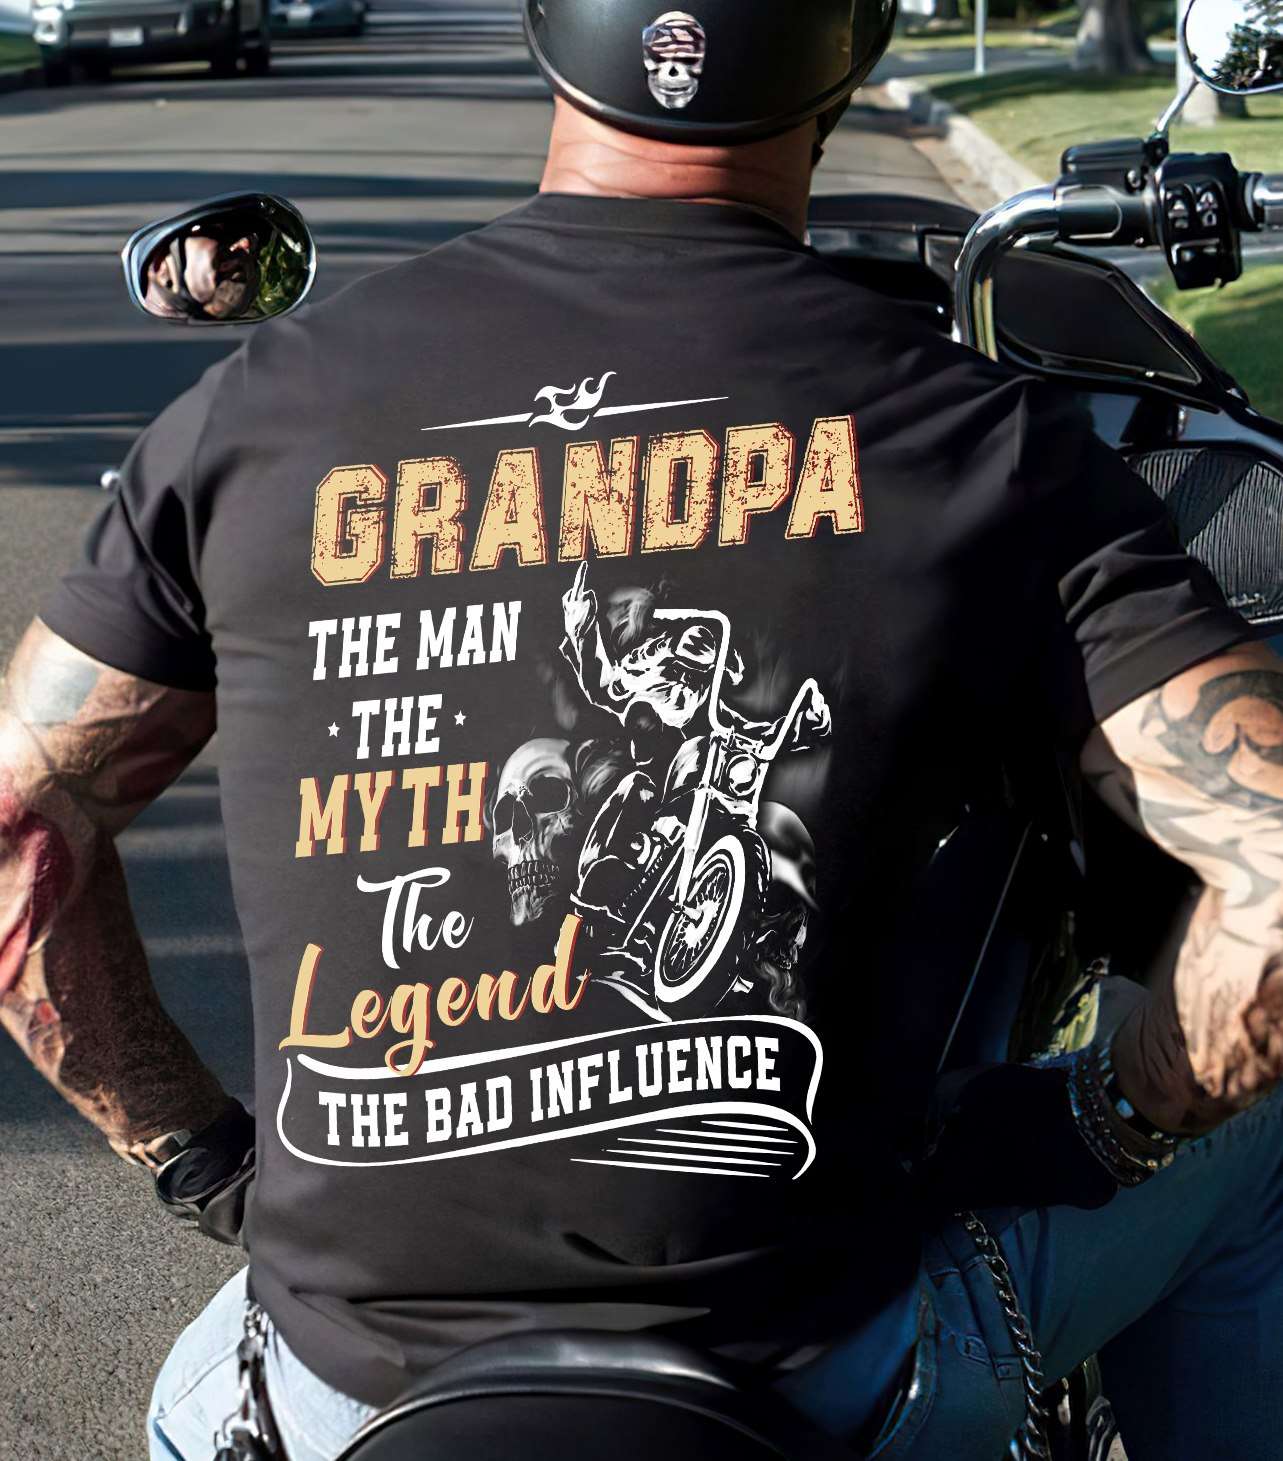 Grandpa motorcycle - The man, the myth, the legend, the bad influence